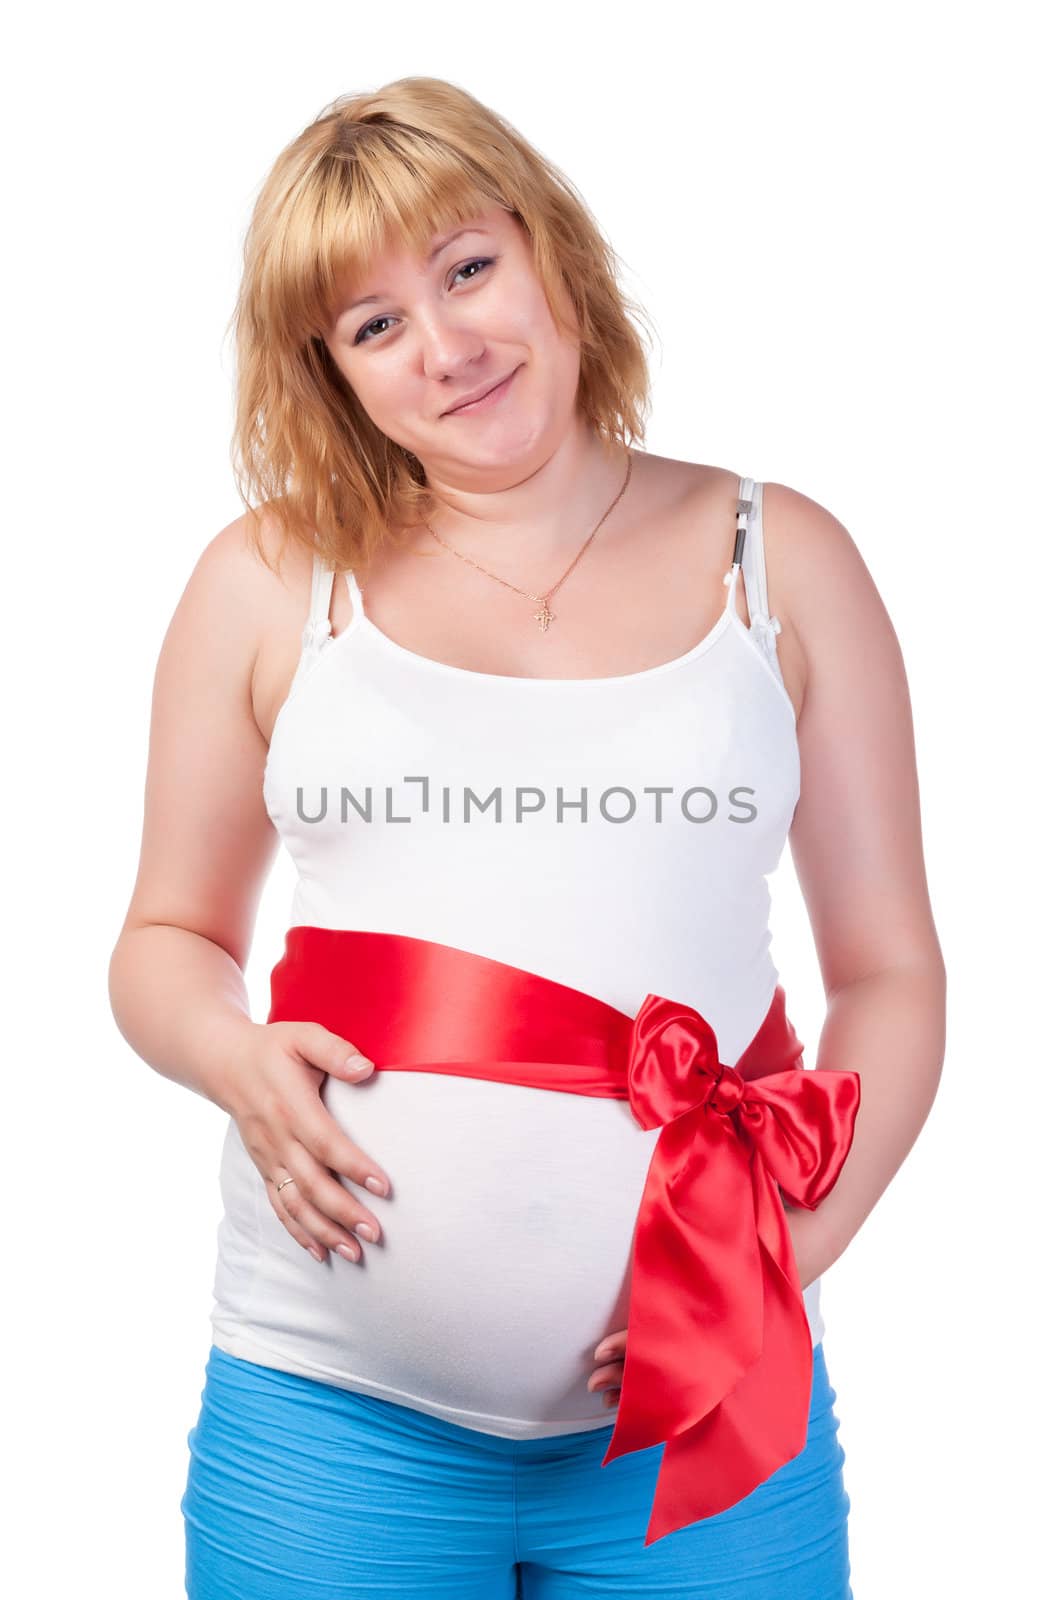 Pregnant Woman Touching her Belly, over white background